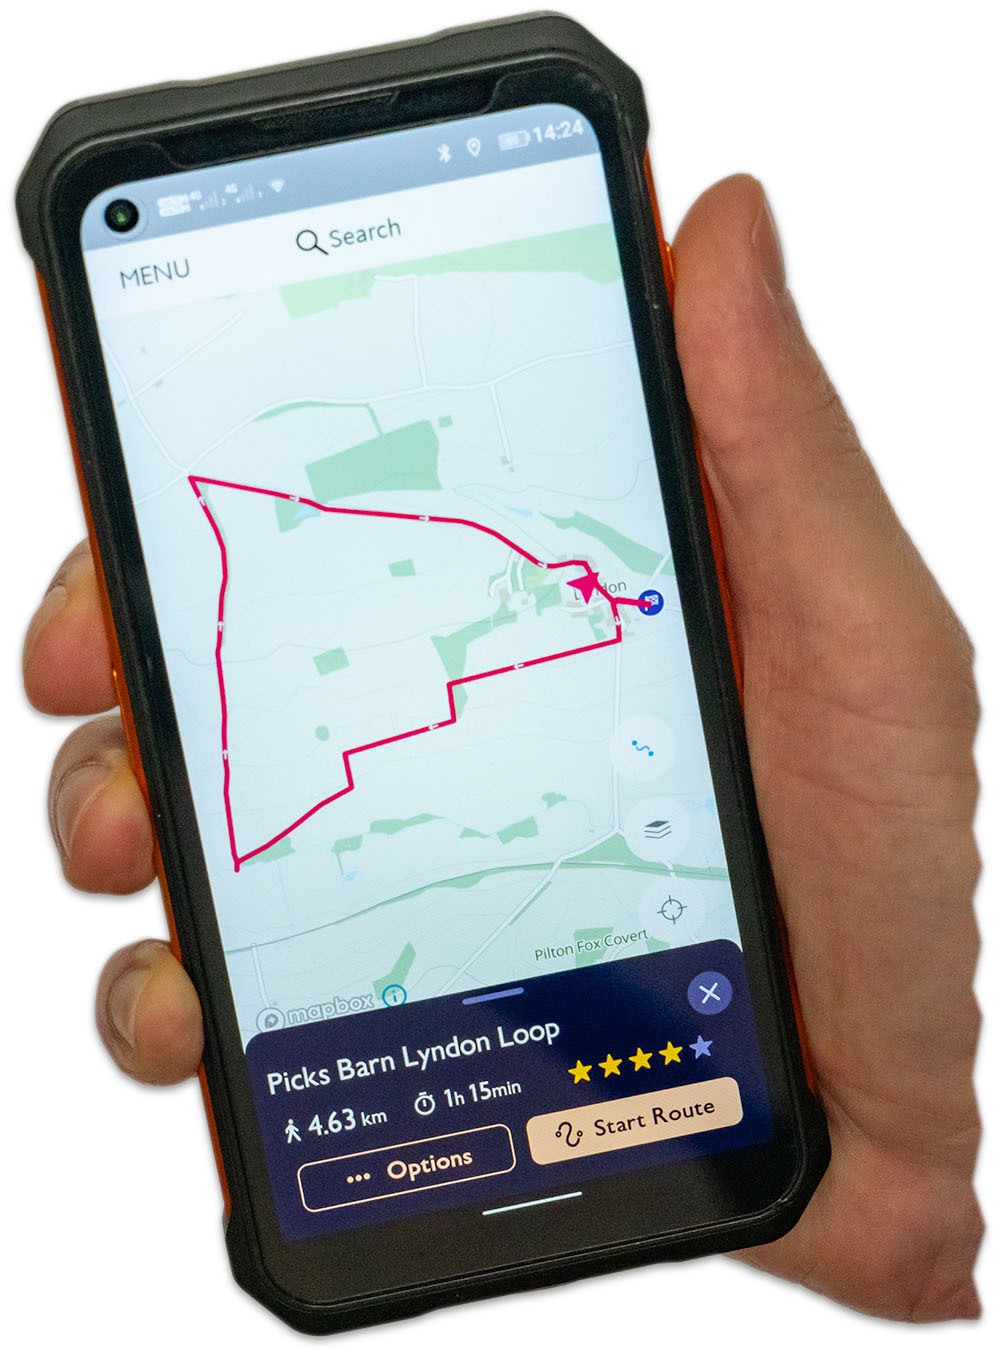 Image of a mobile phone running the OS Maps app